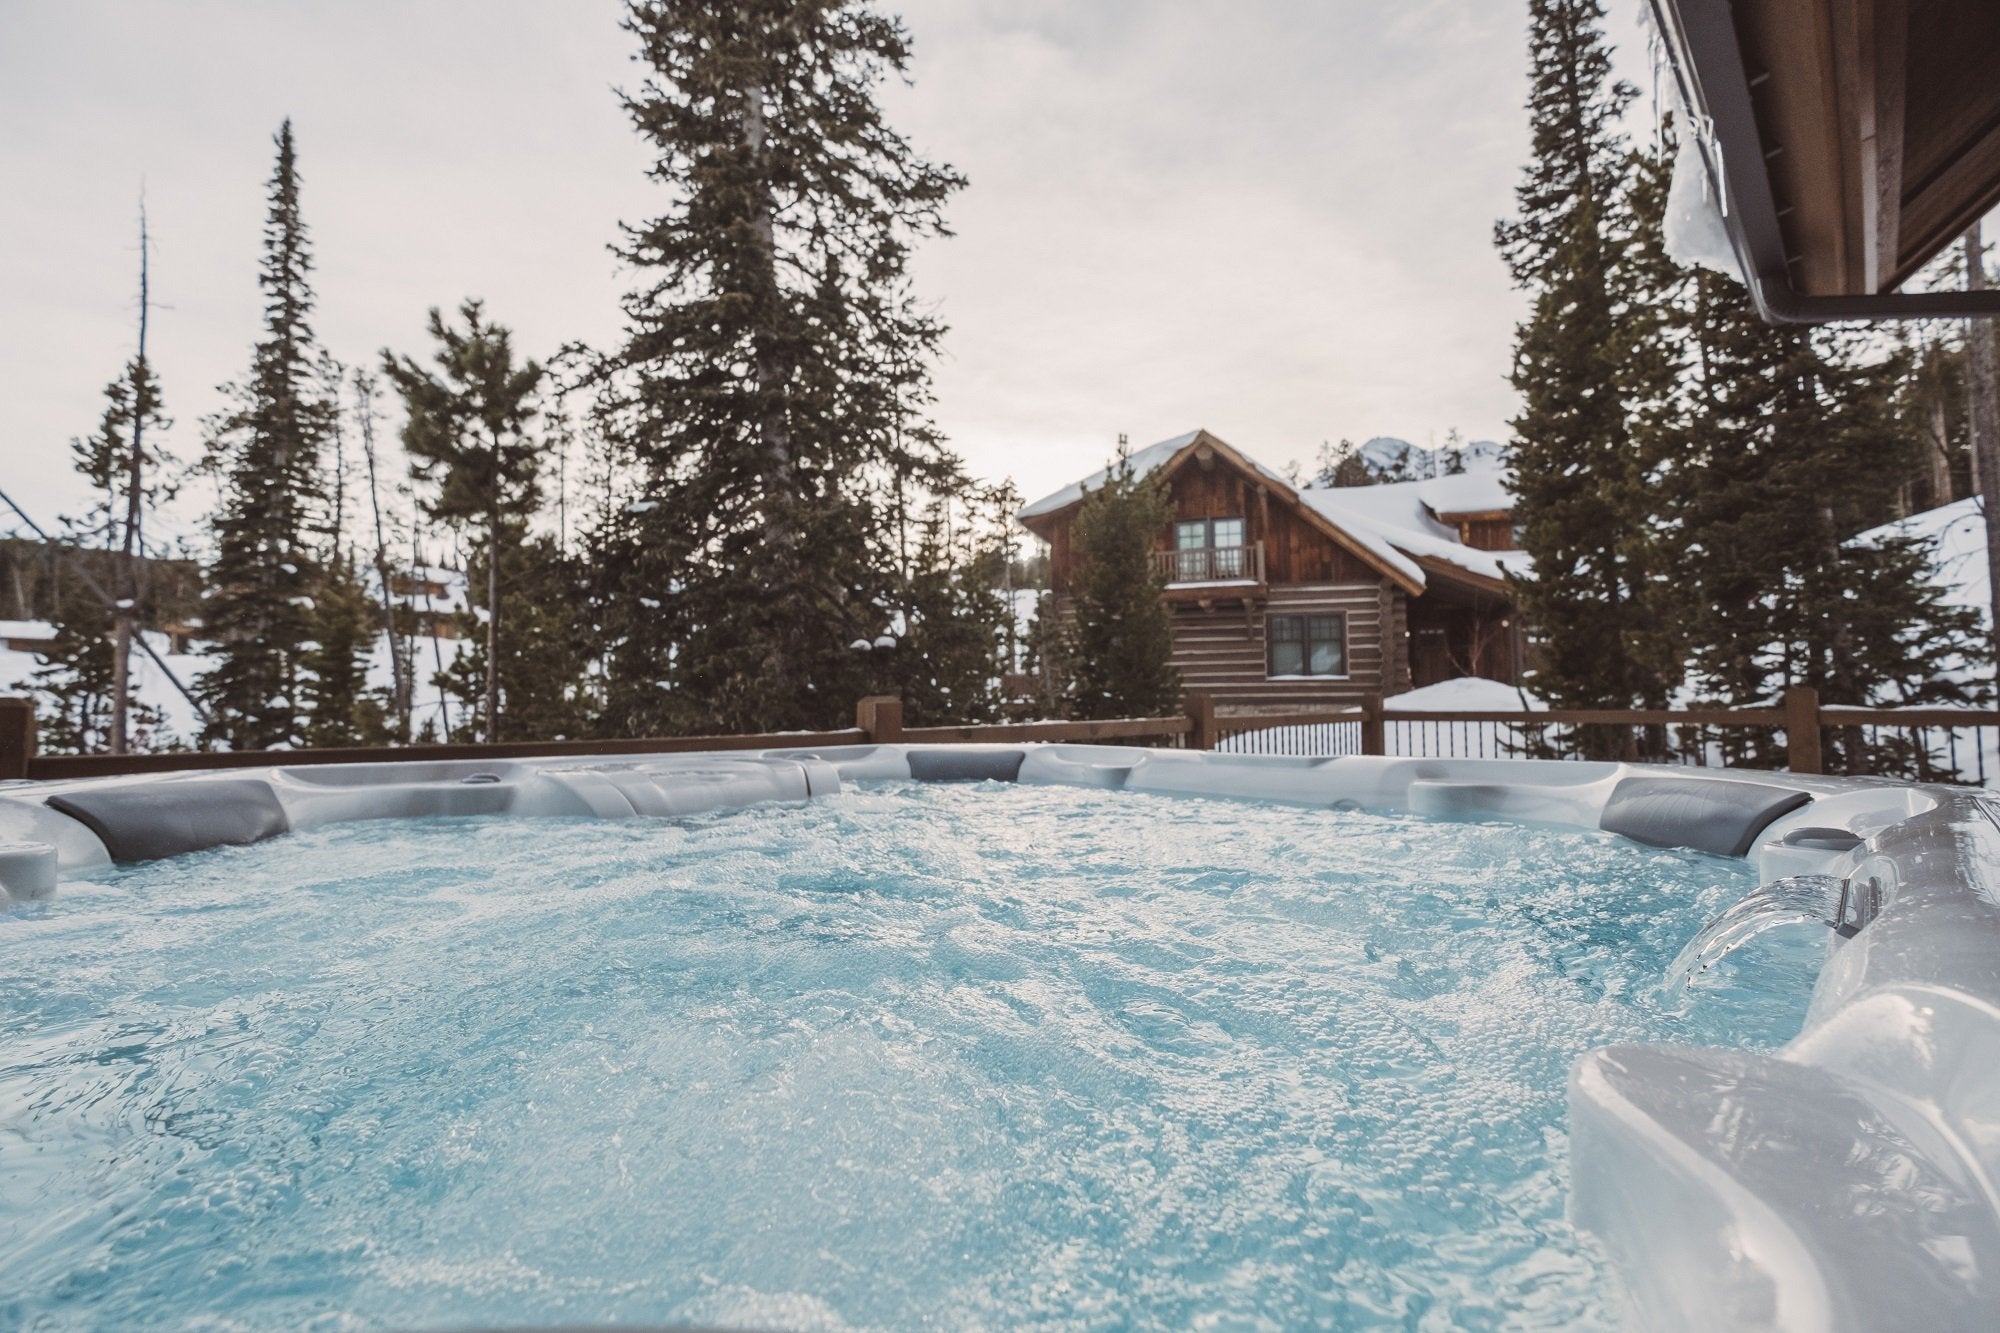 Tips for Using Your Hot Tub in Winter